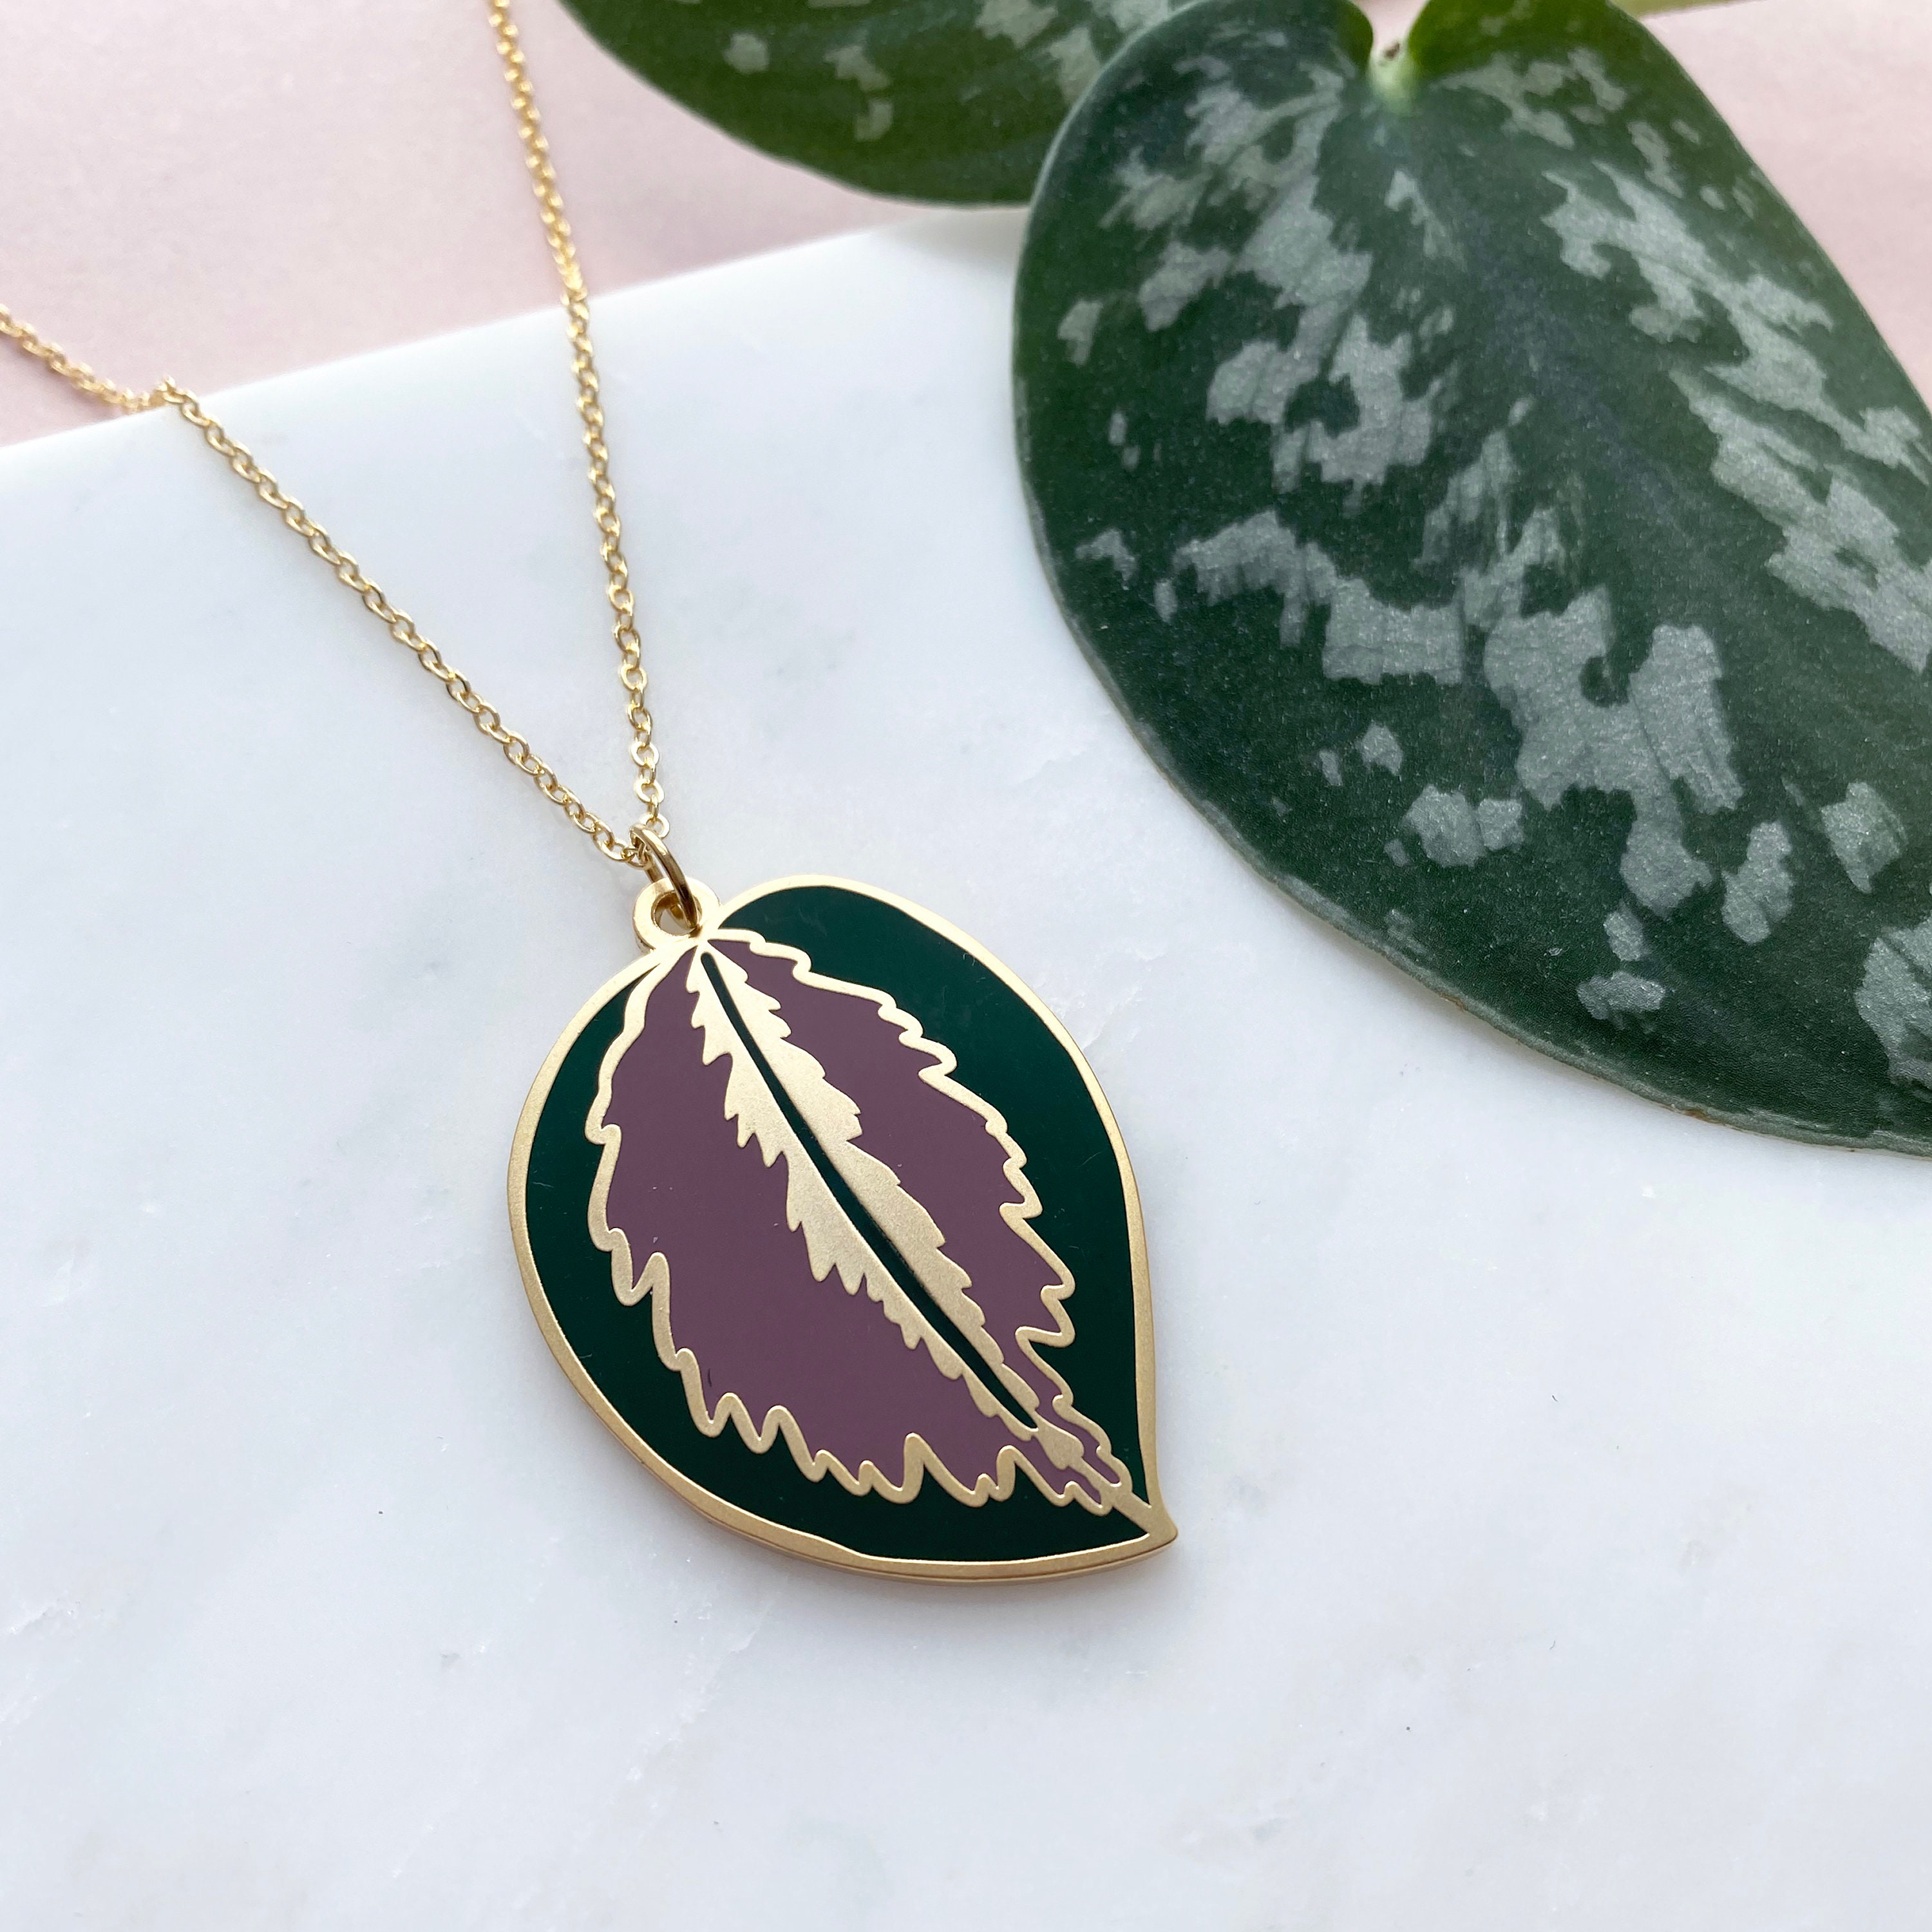 Calathea Leaf Necklace - Enamel Gold Pendant Plant Jewellery Gift For Her